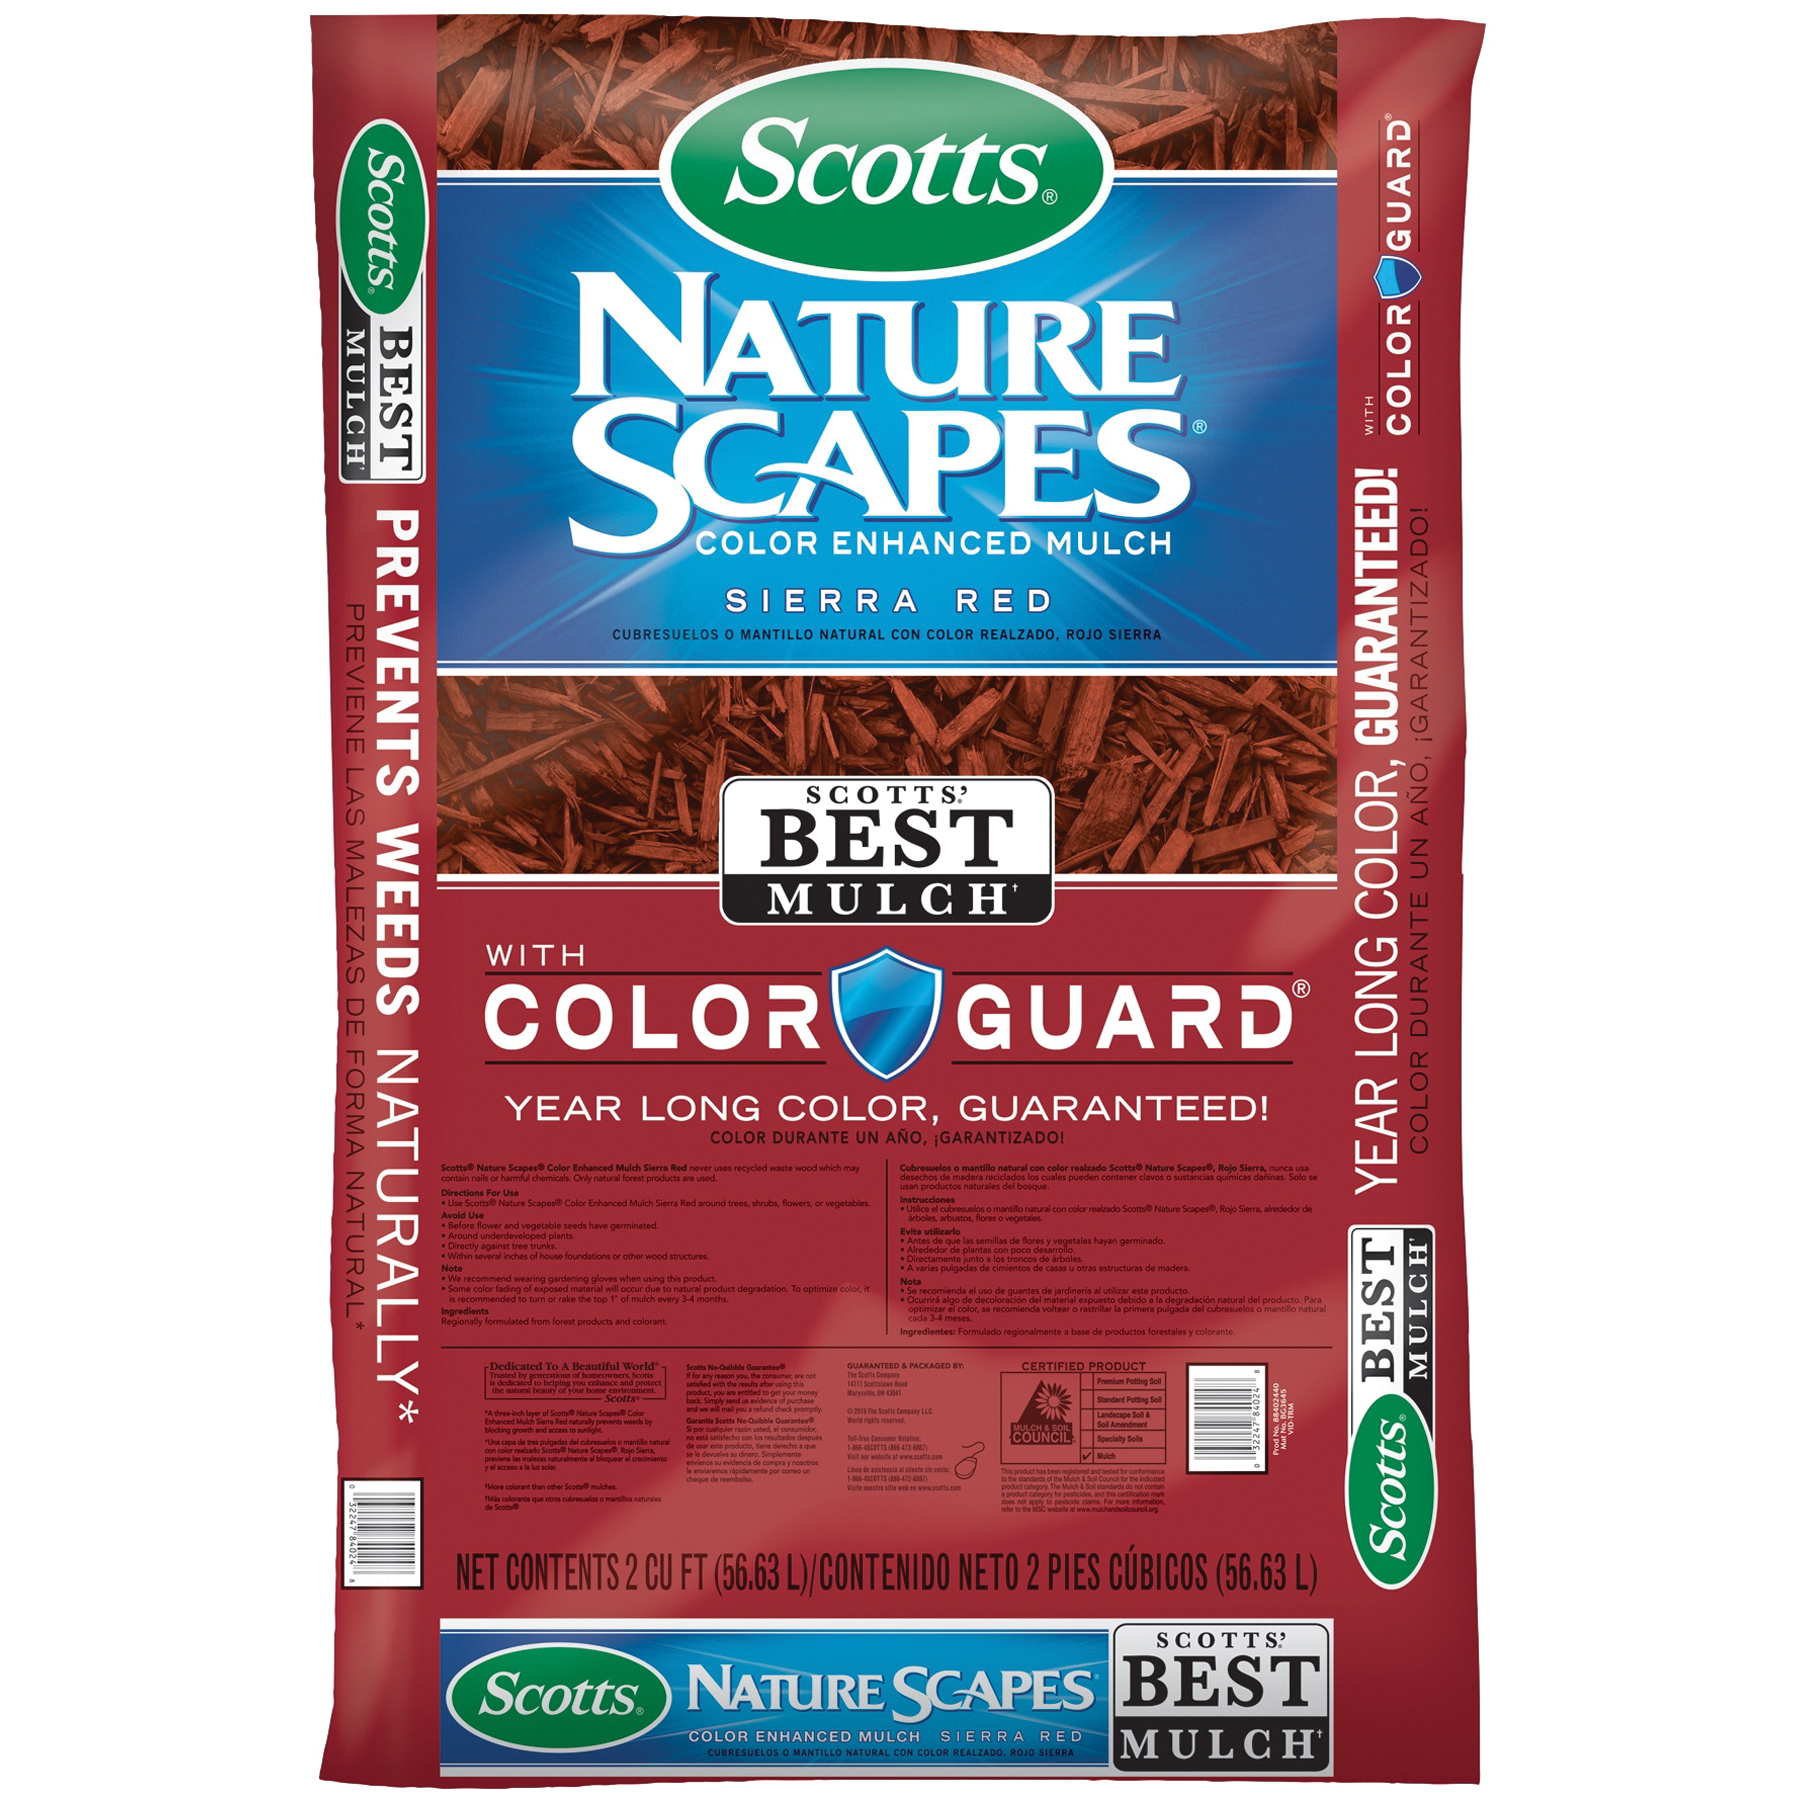 Scotts 88402440 Mulch, Solid, Earthy, Red, 2 cu-ft Bag - 1